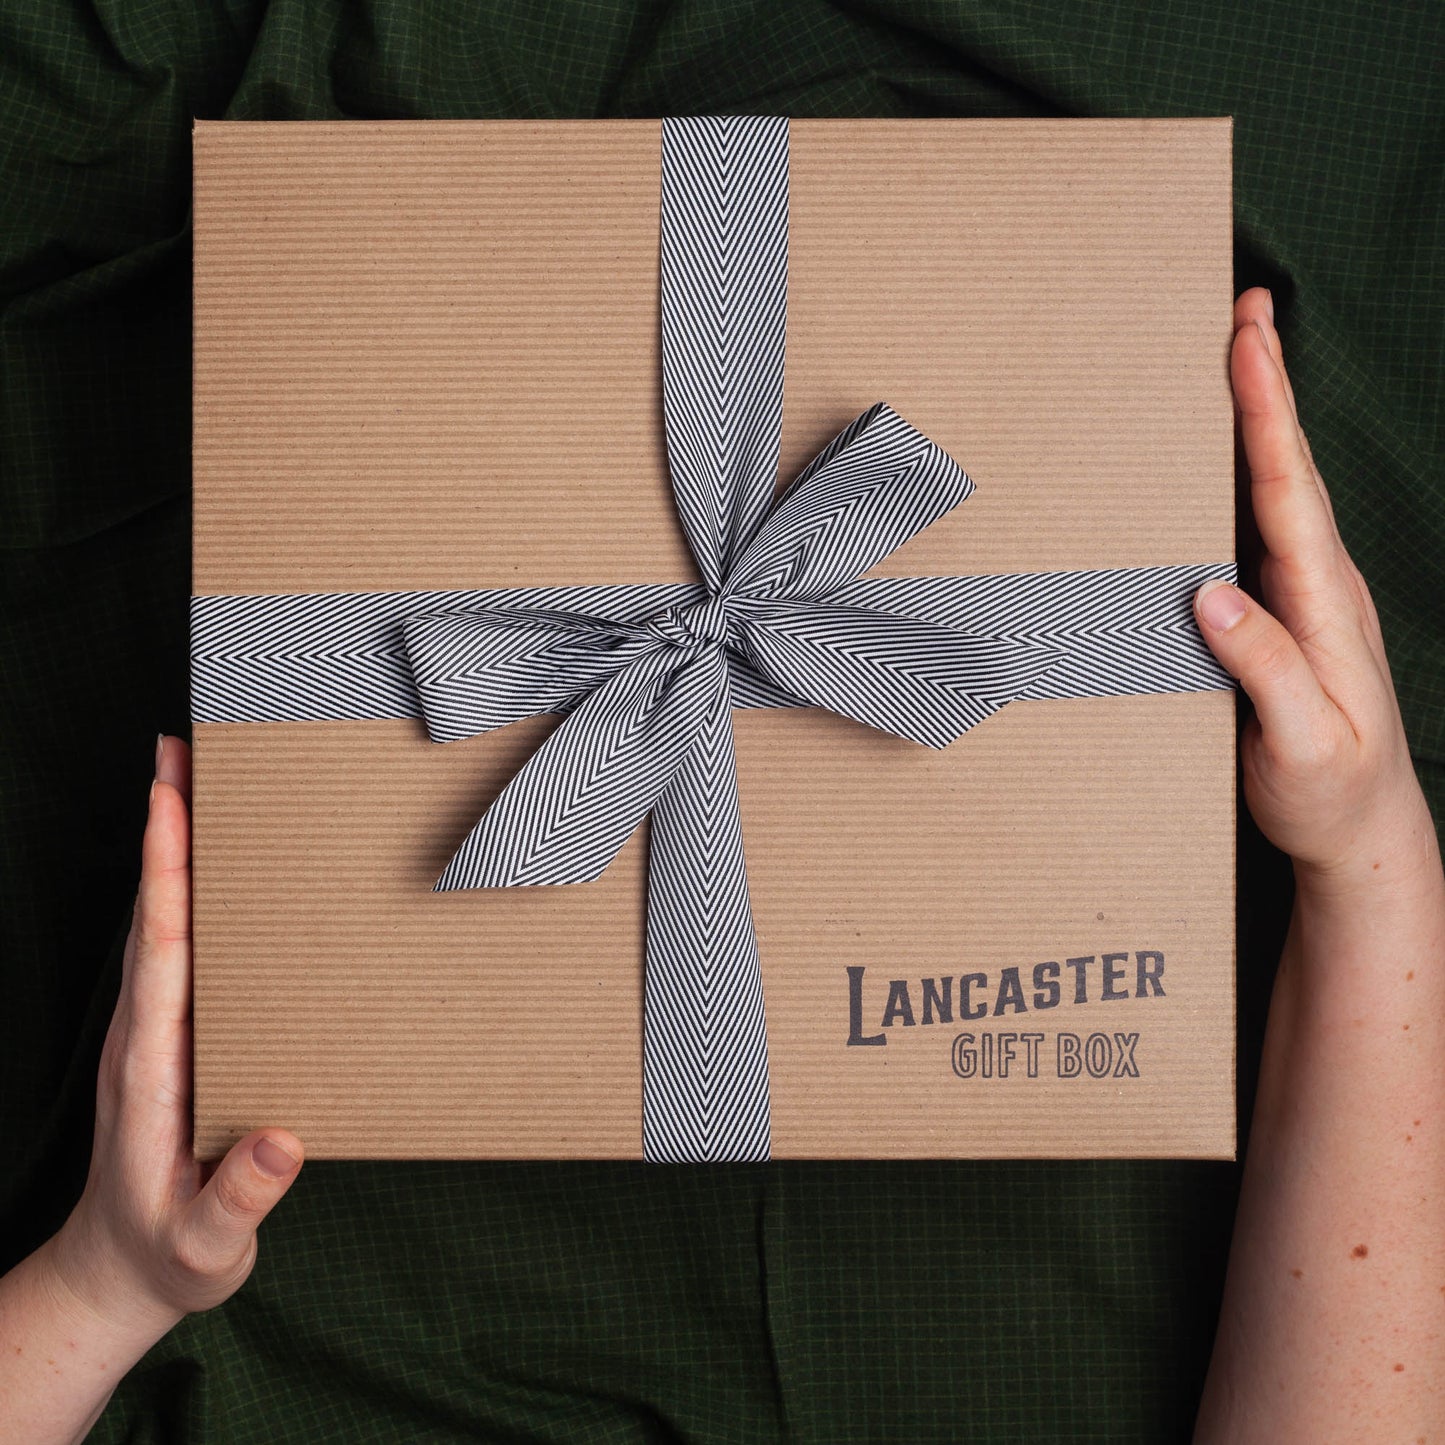 Hands holding a Lancaster Gift Box with black & white bow.